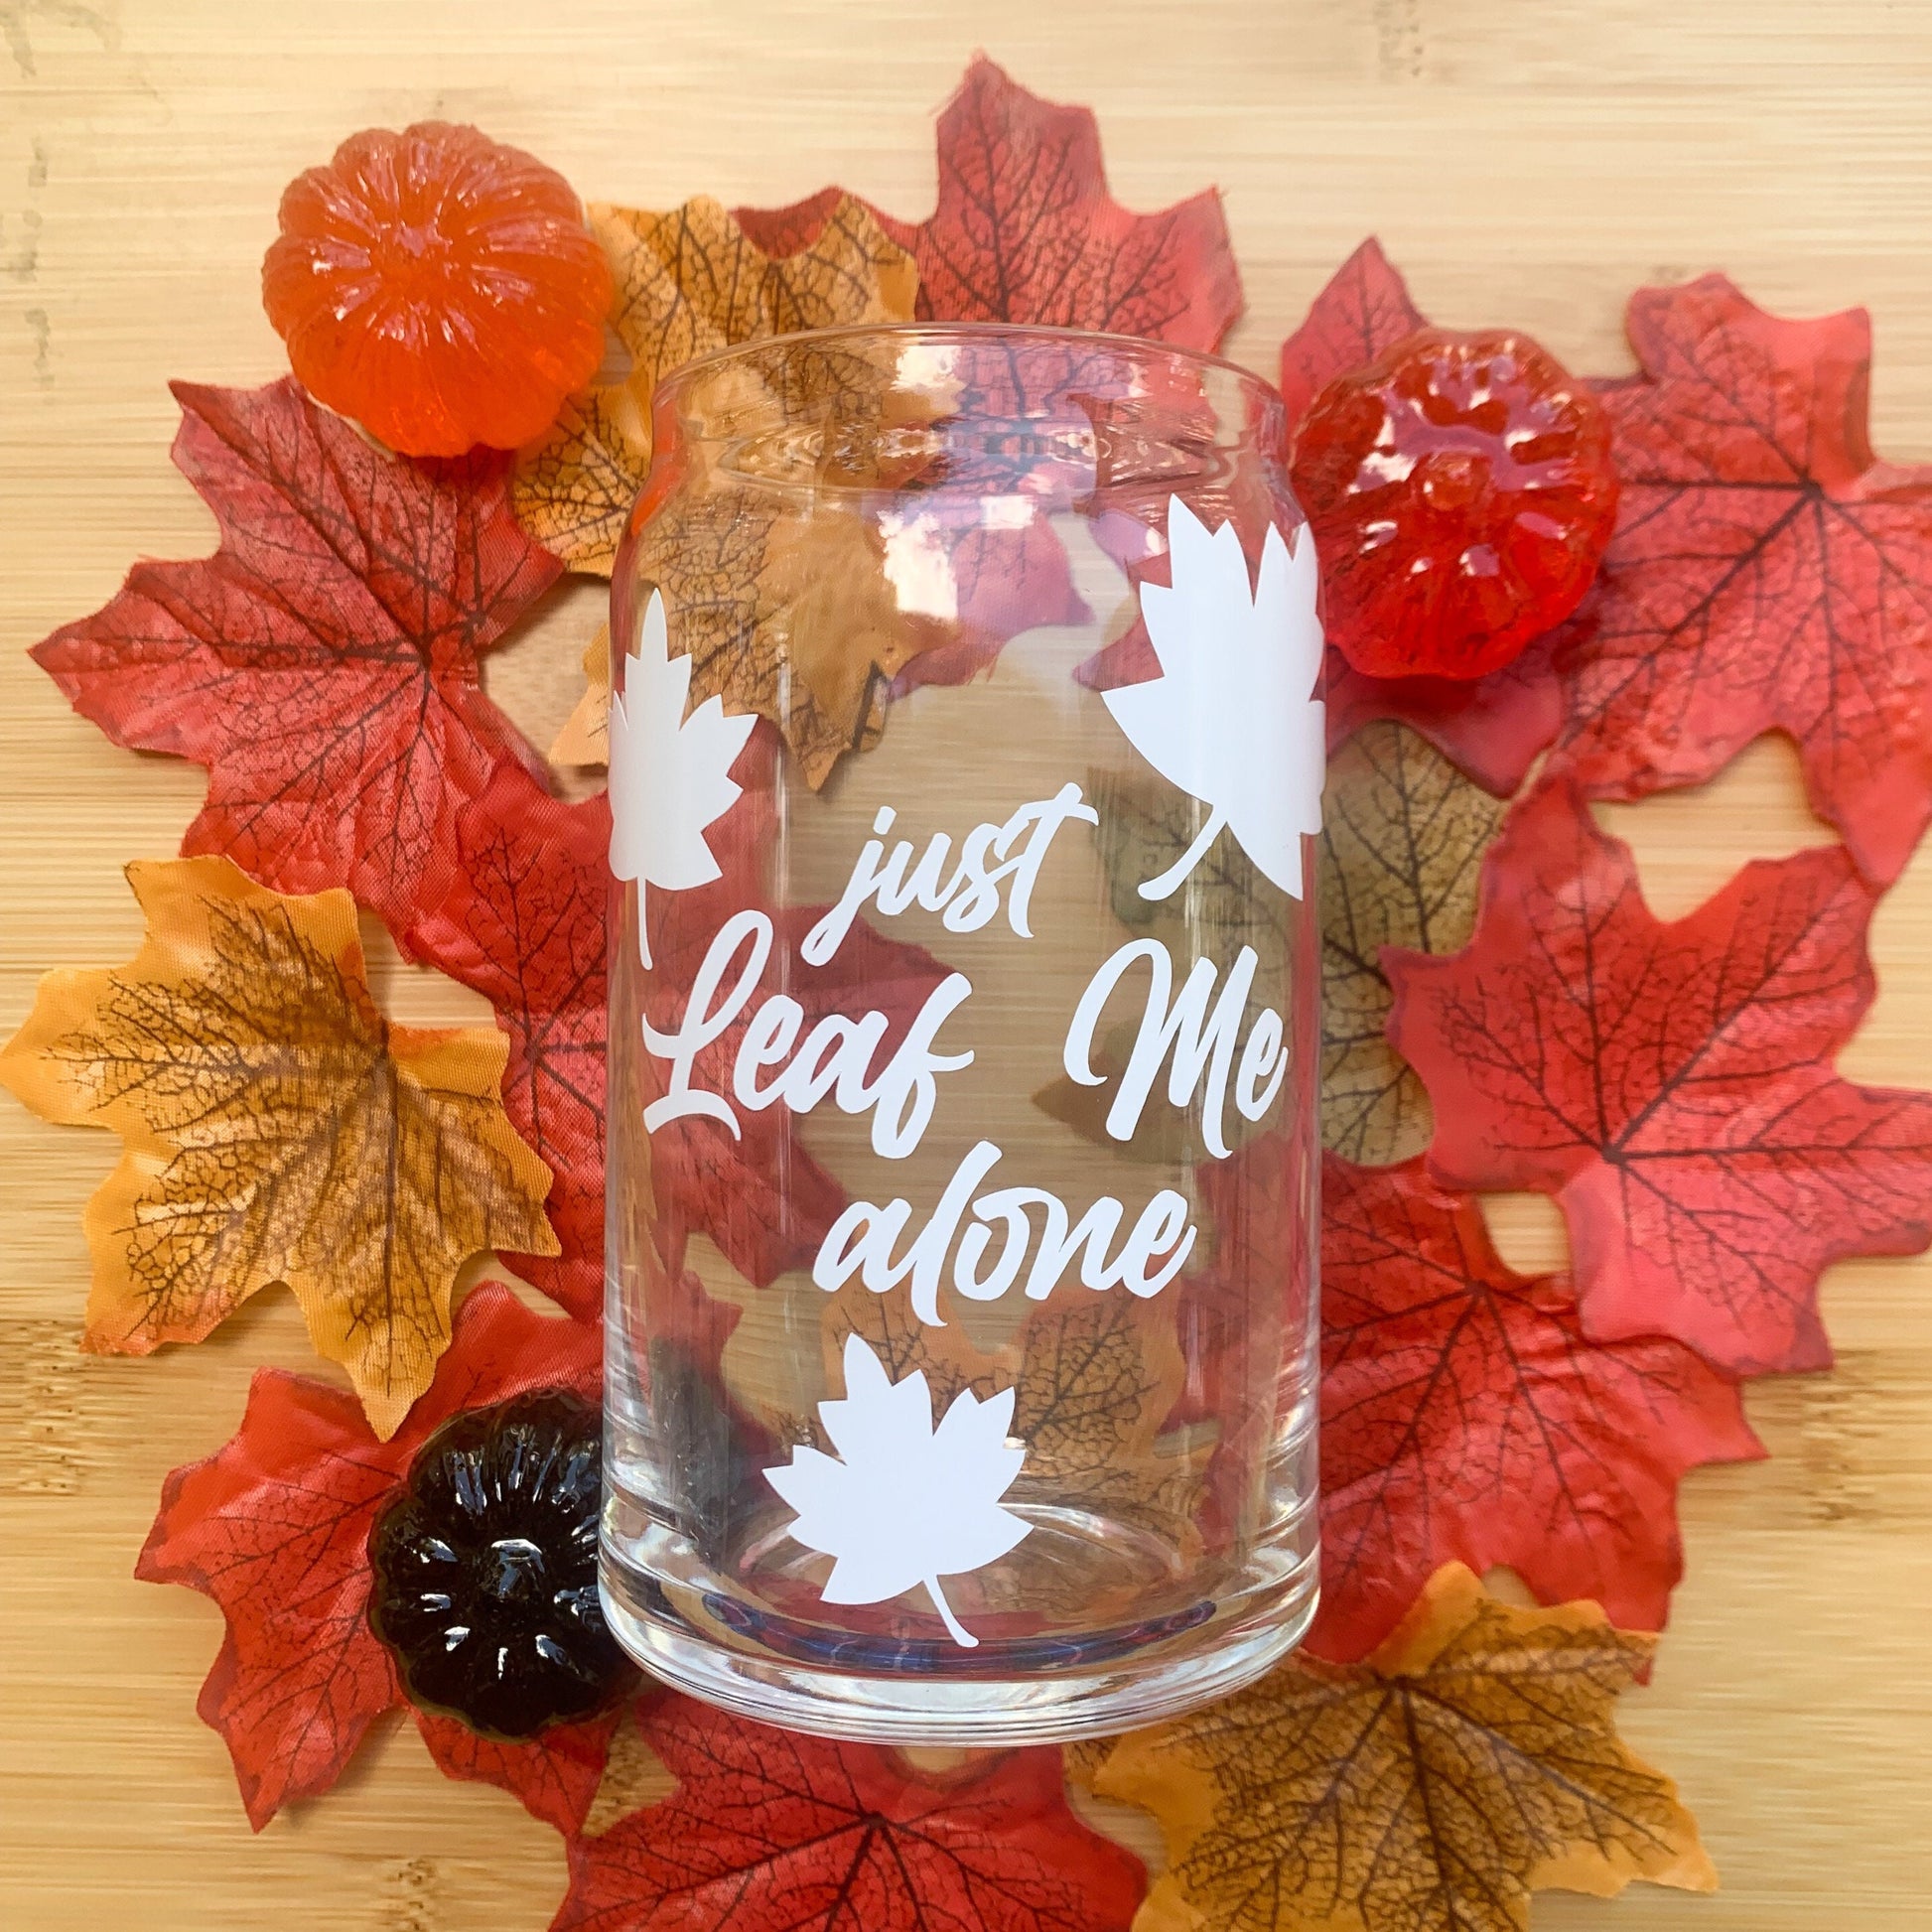 Just leaf me alone fall glass cup surrounded by colorful leaves and mini pumpkins.